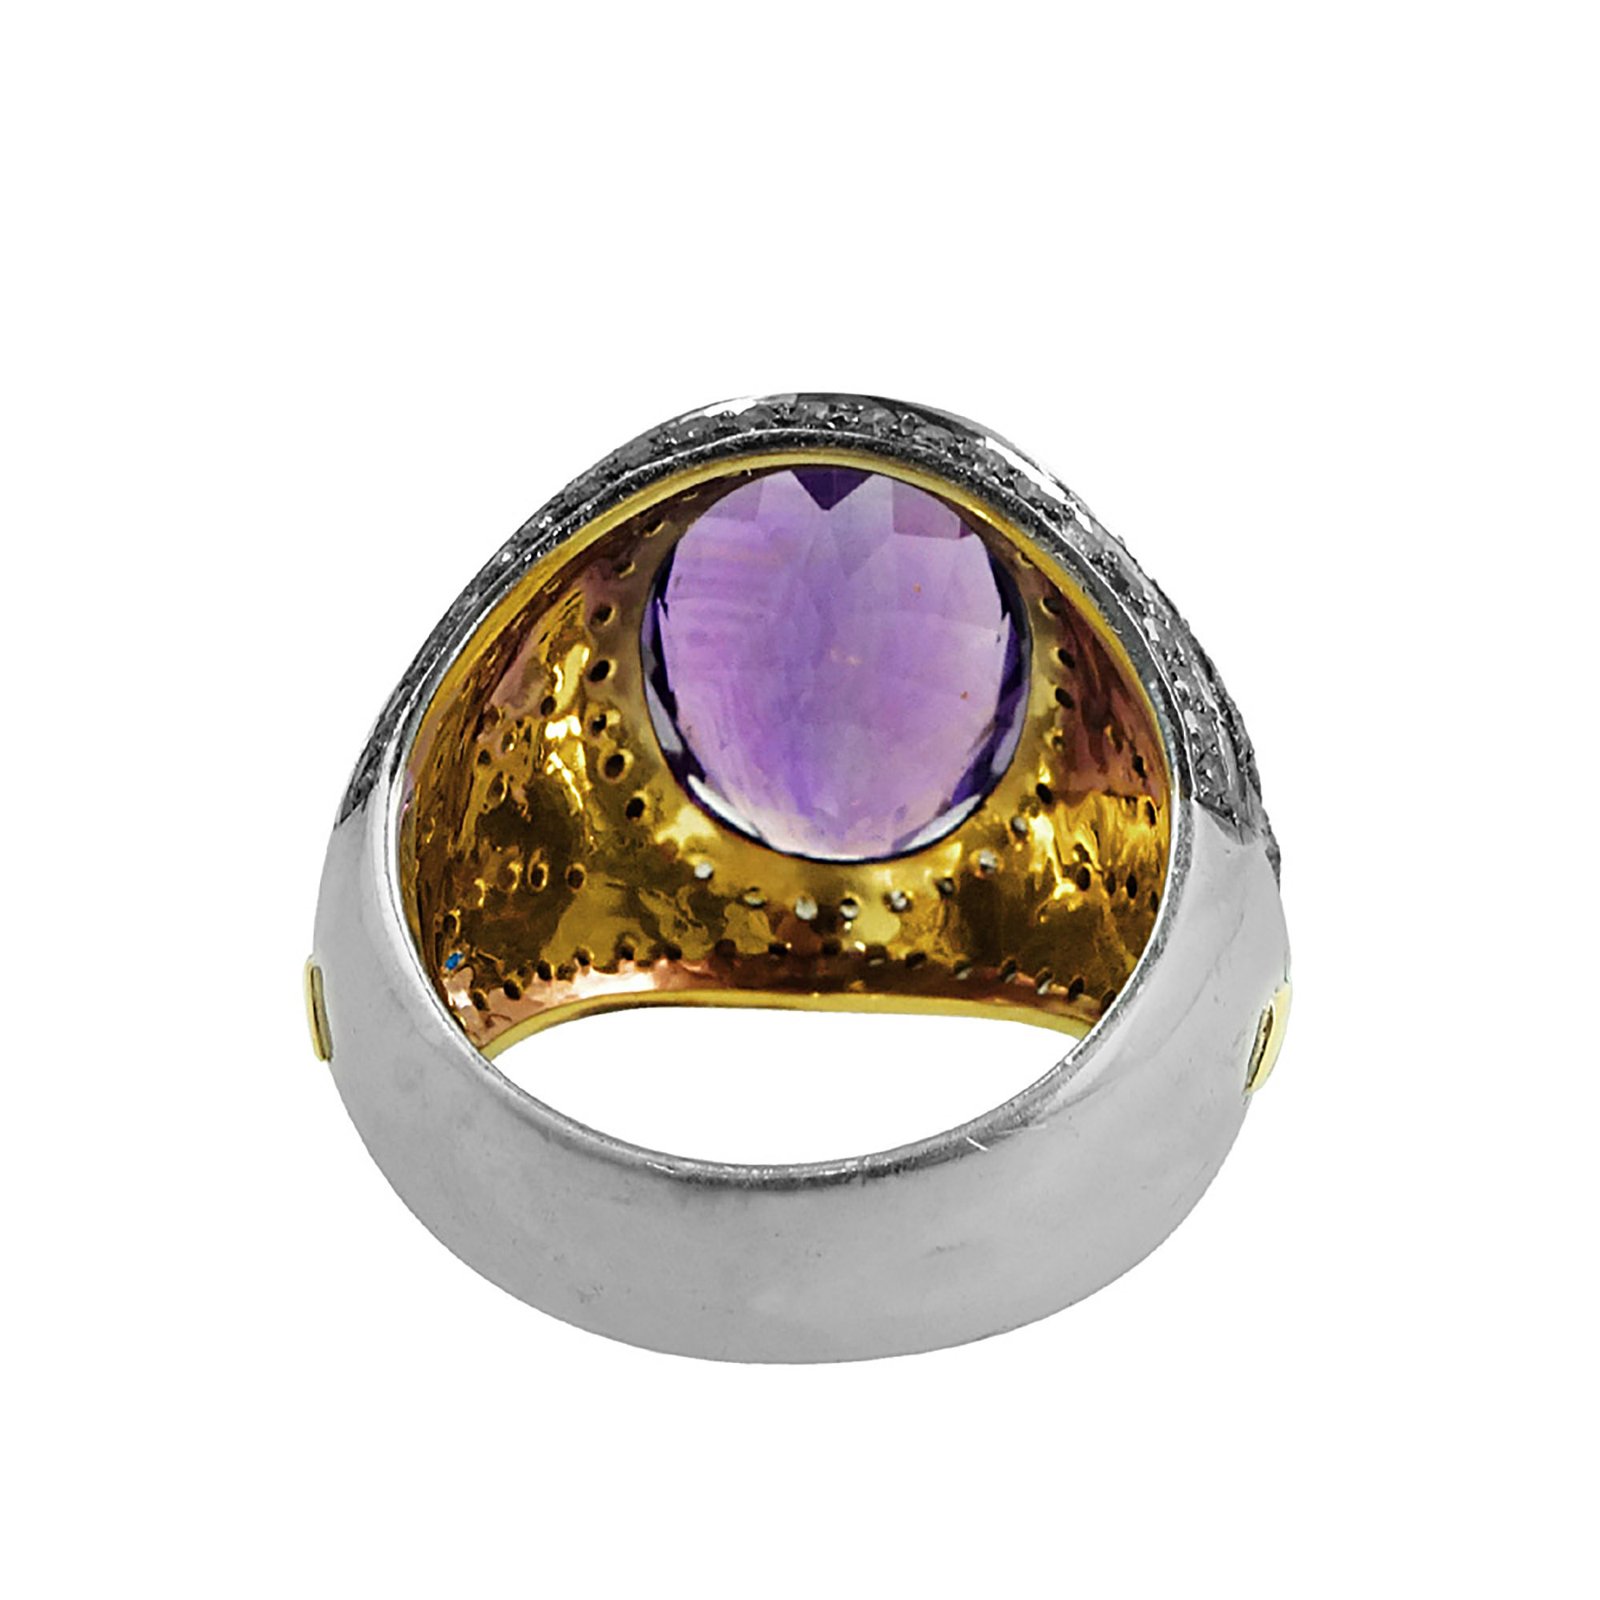 Amethyst gemstone ring made in 925 silver with diamond